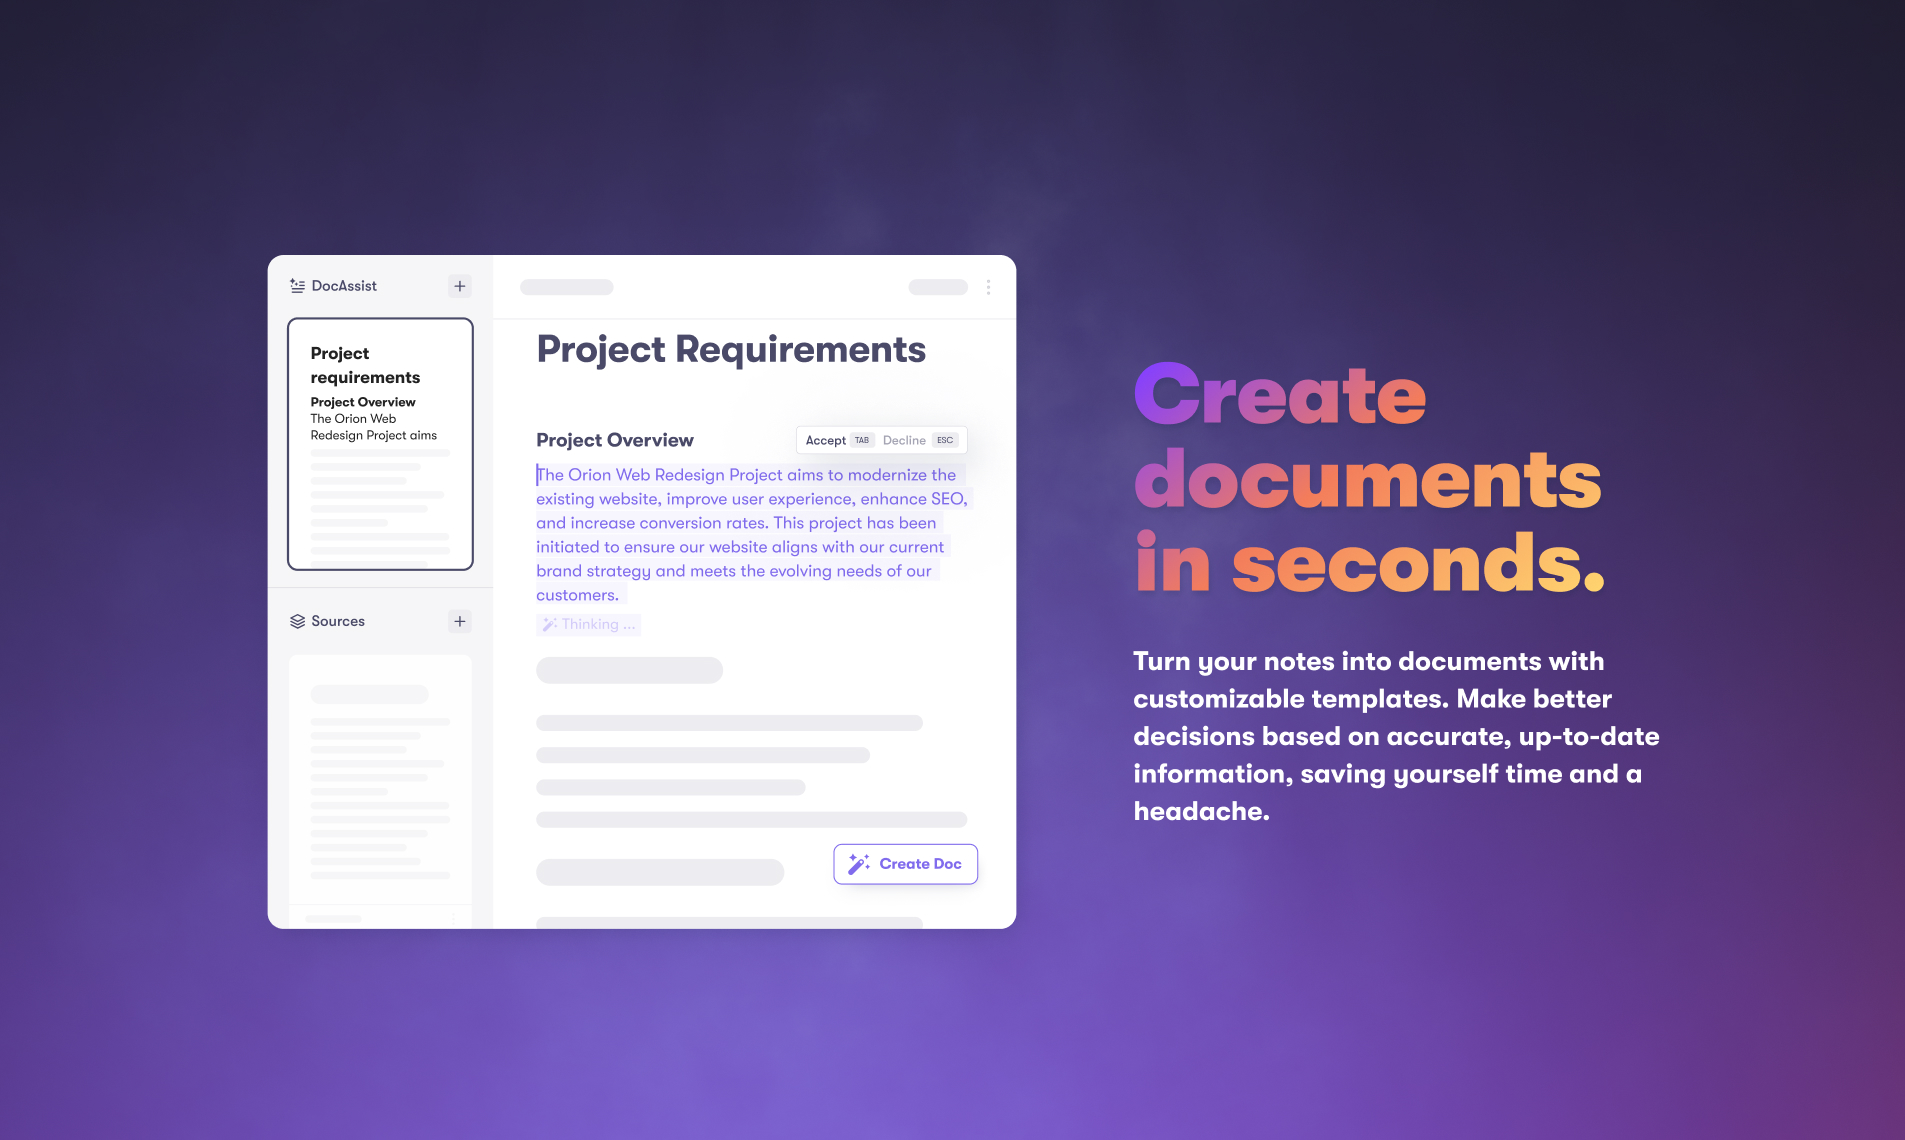 Create documents in seconds